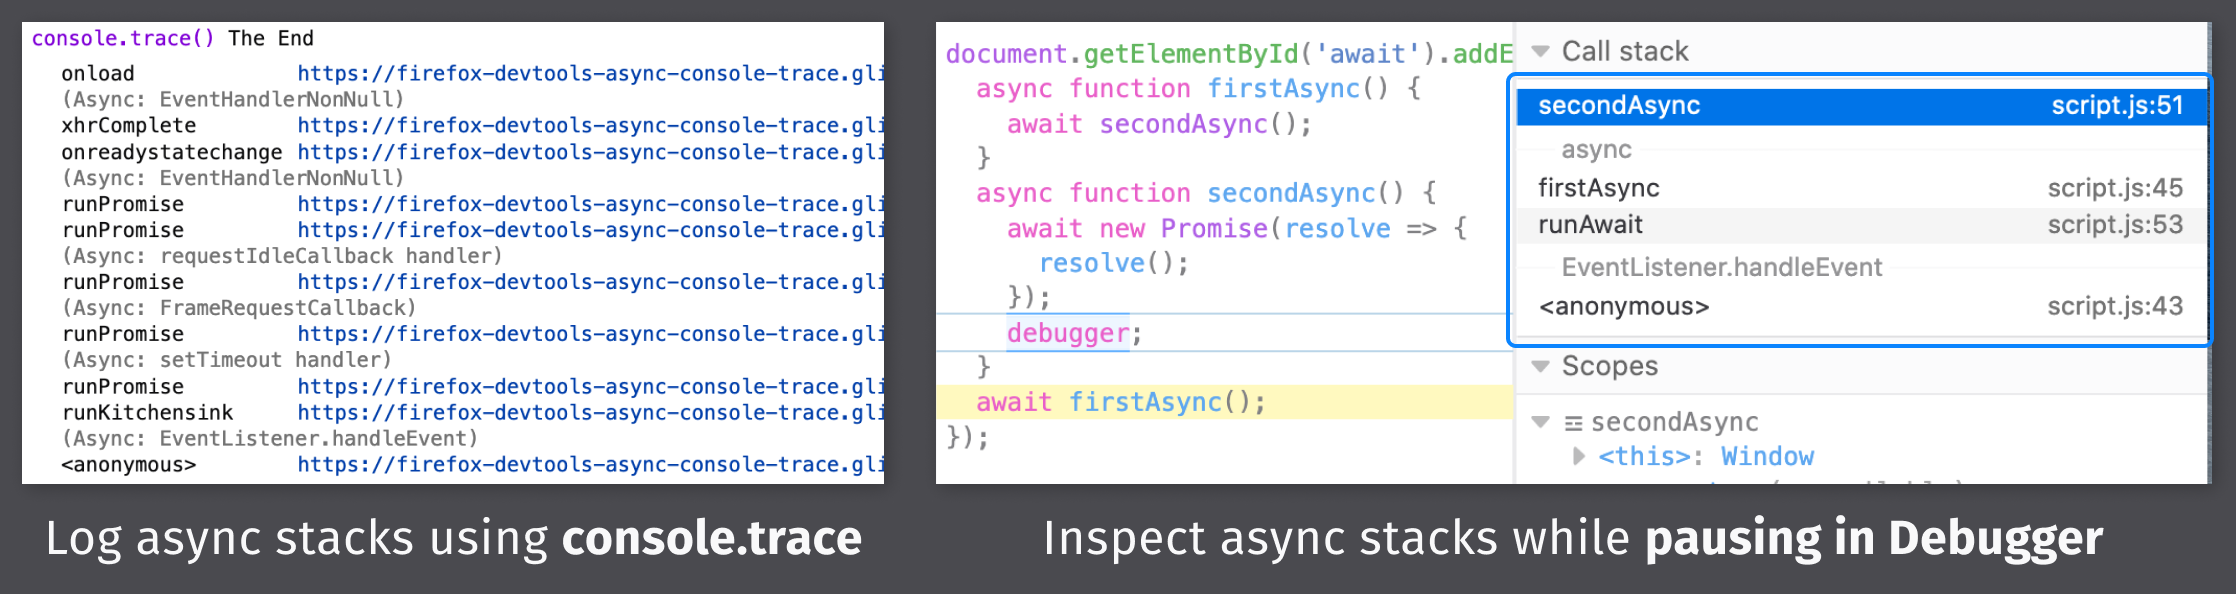 Async stacks add promise execution for both Console and Debugger